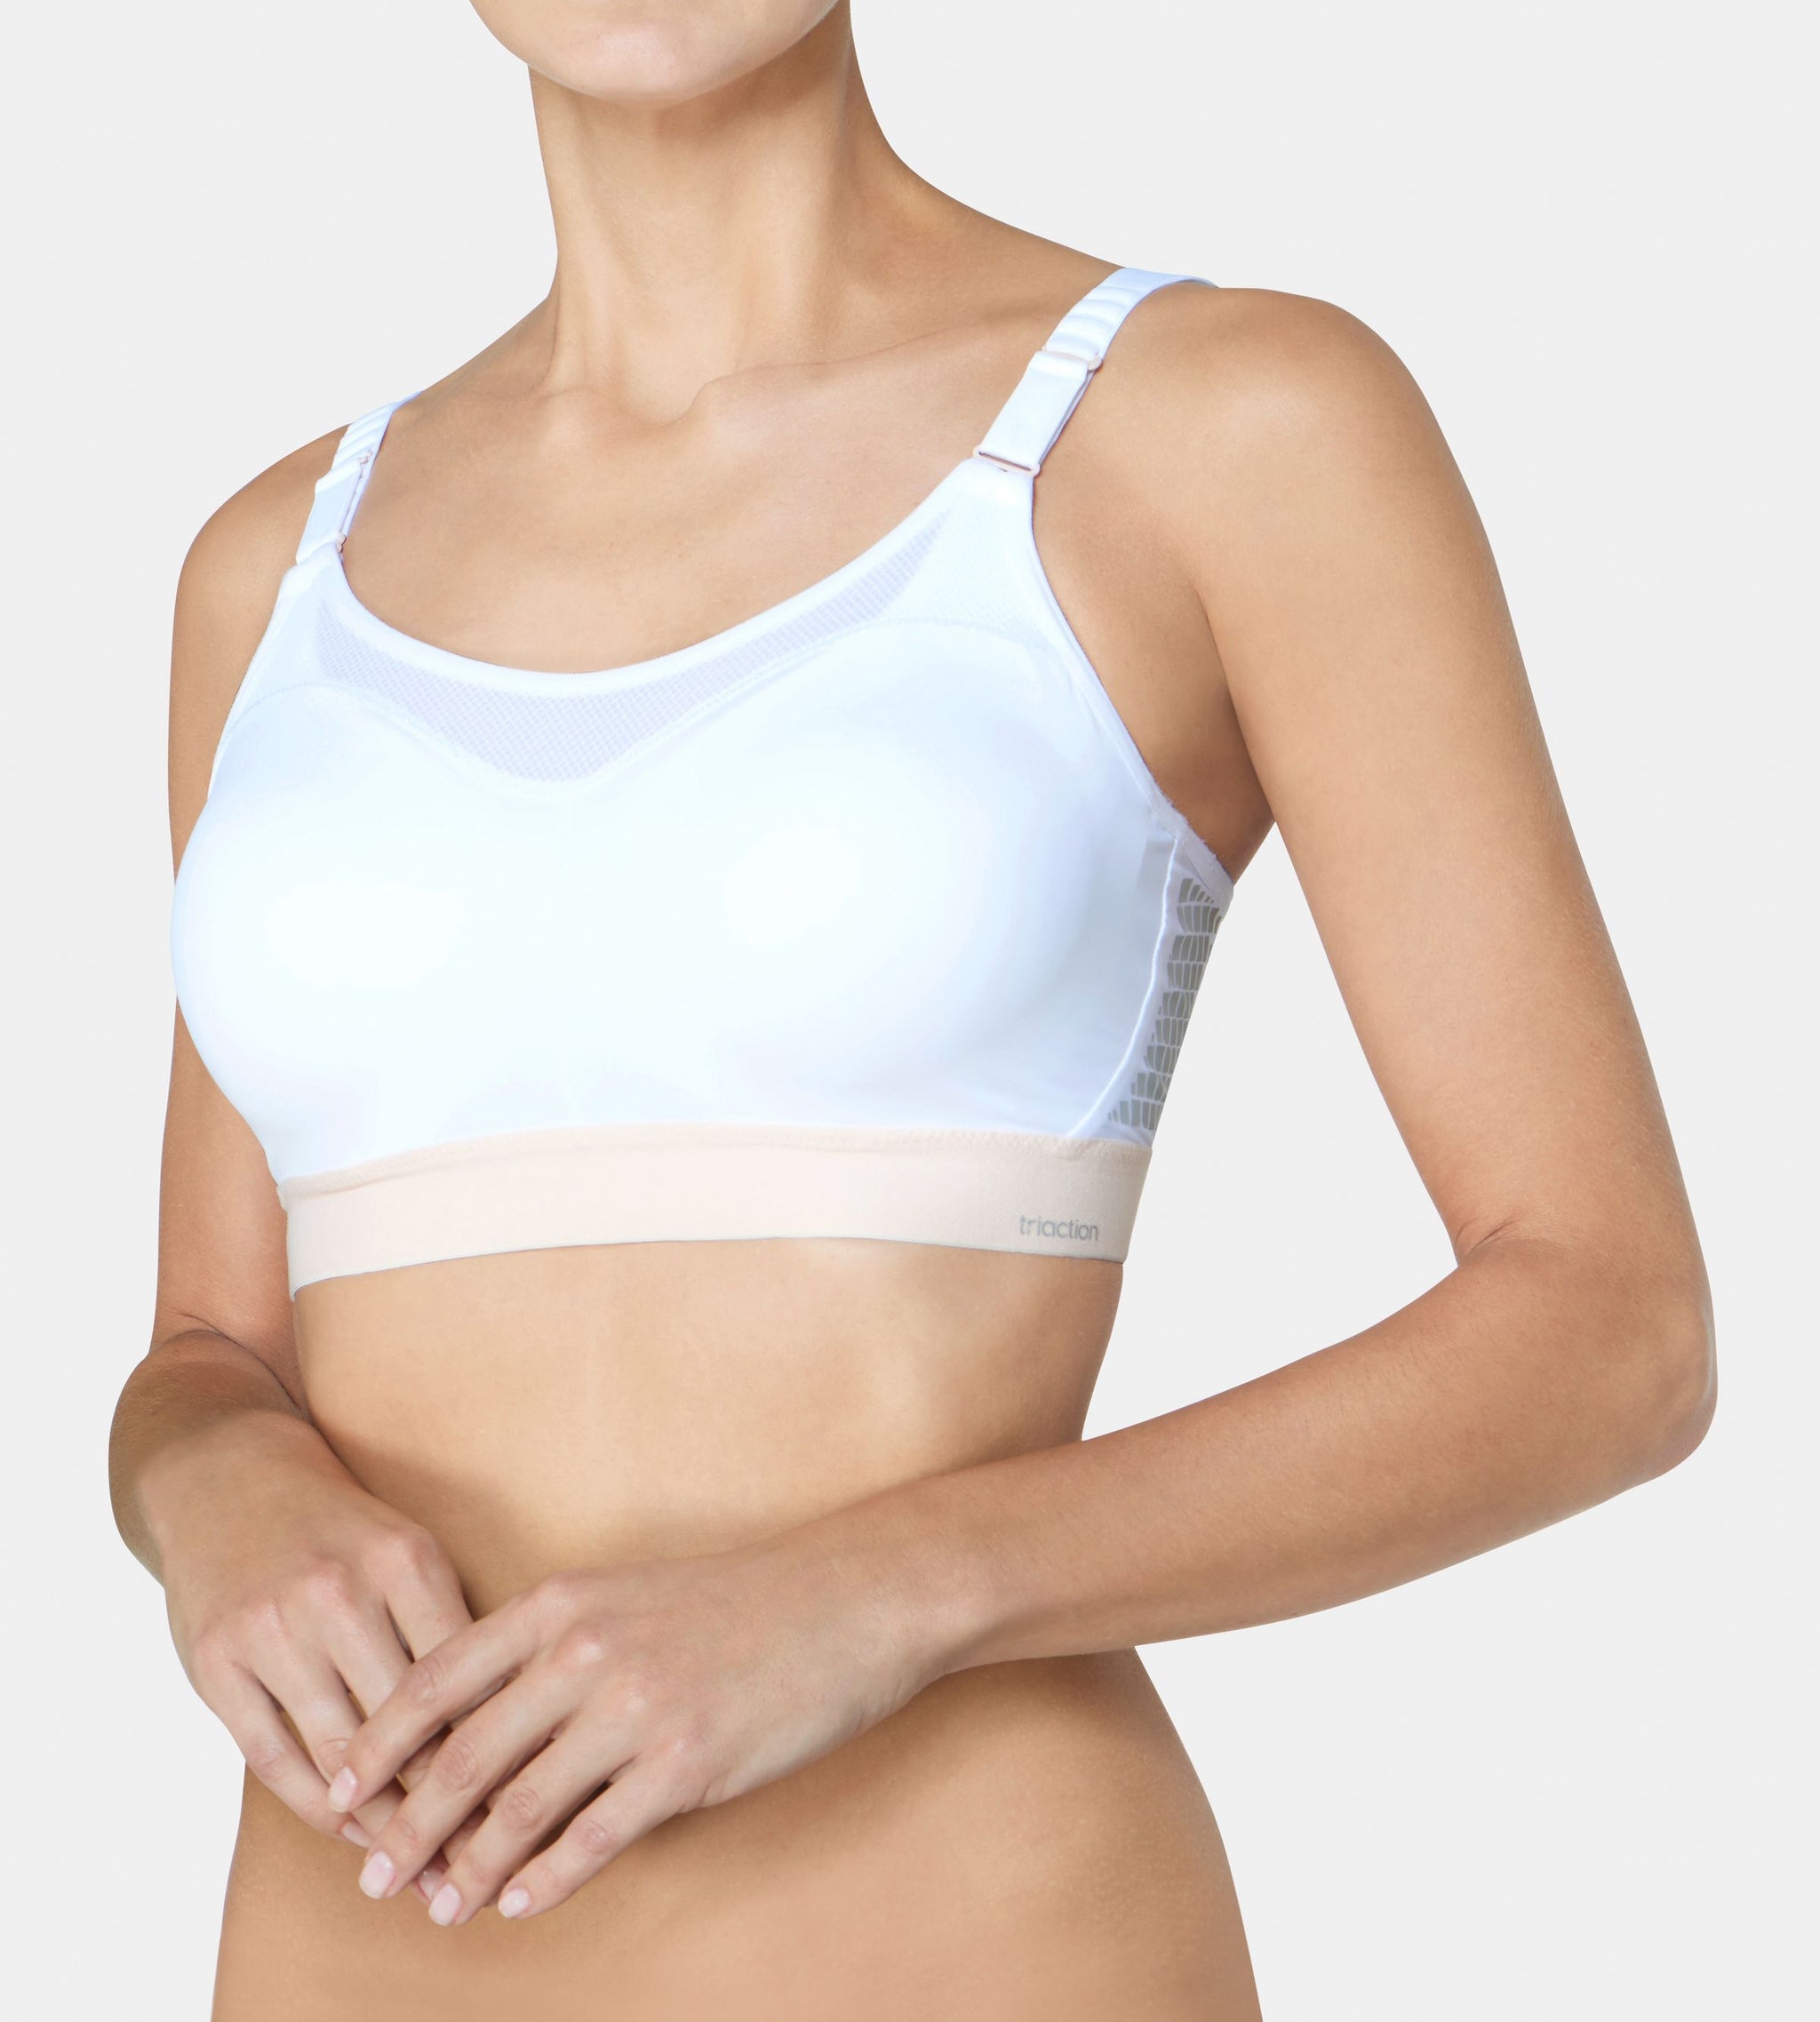 Triumph - Our multi-purpose Triaction Control Lite sports bra has straps  that perfectly adapt to your shape for great hold. #Triaction  #TriumphLingerie